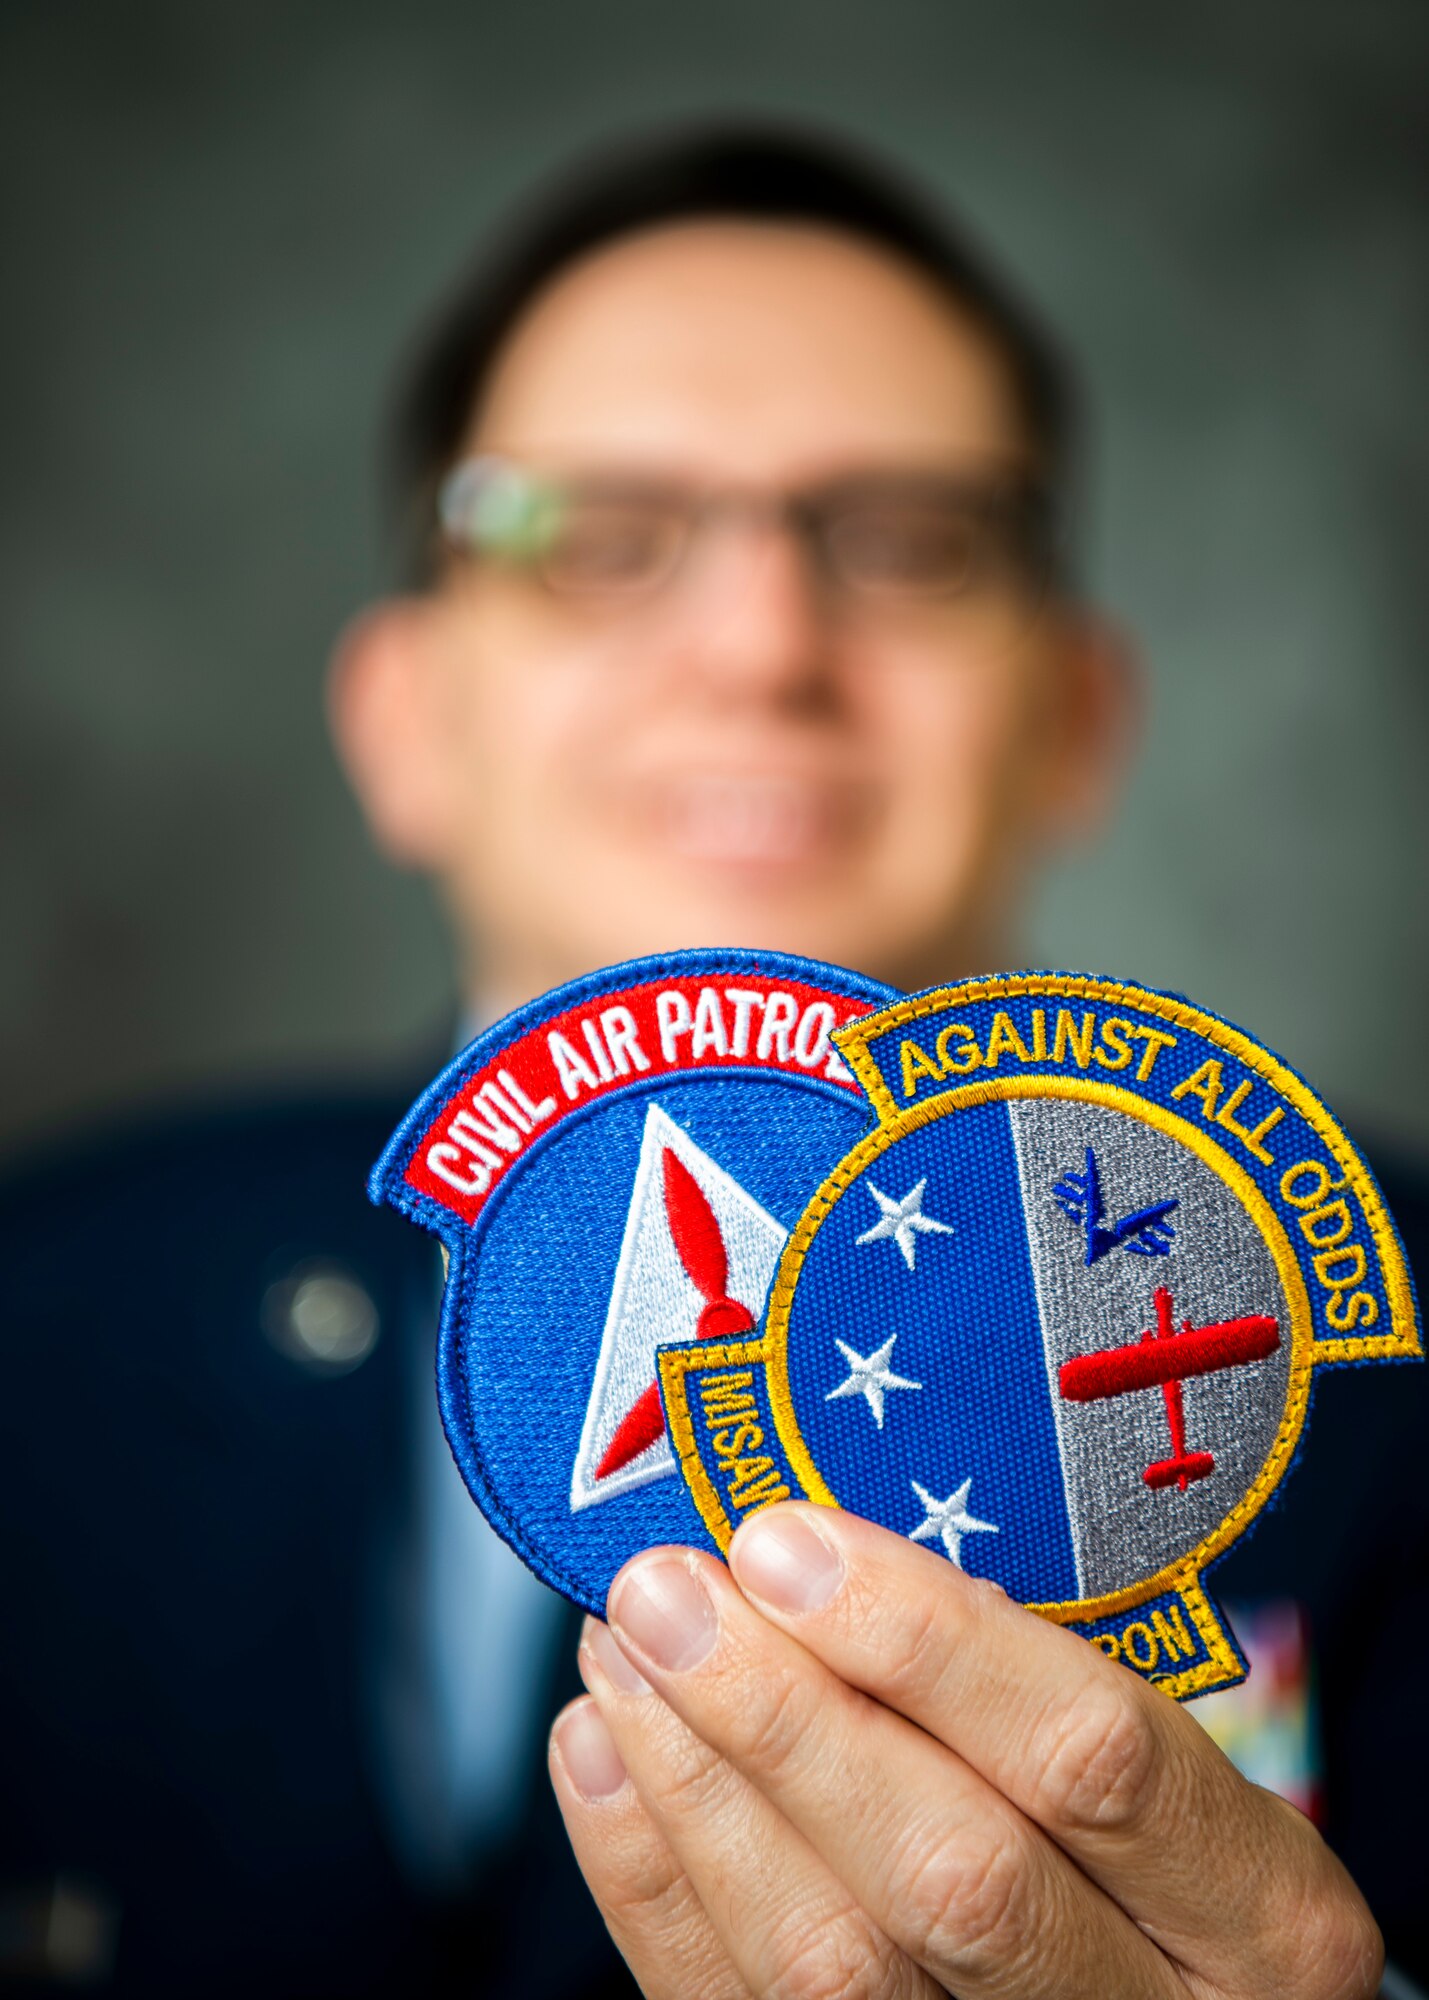 U.S. Air Force Tech. Sgt. Jeffrey MacHott, Civil Air Patrol (CAP) member, poses for photos at Misawa Air Base, Japan, Nov. 15, 2022. MacHott joined the CAP Geospatial Team that allows individuals to remotely provide damage assessment services for emergency management agencies.